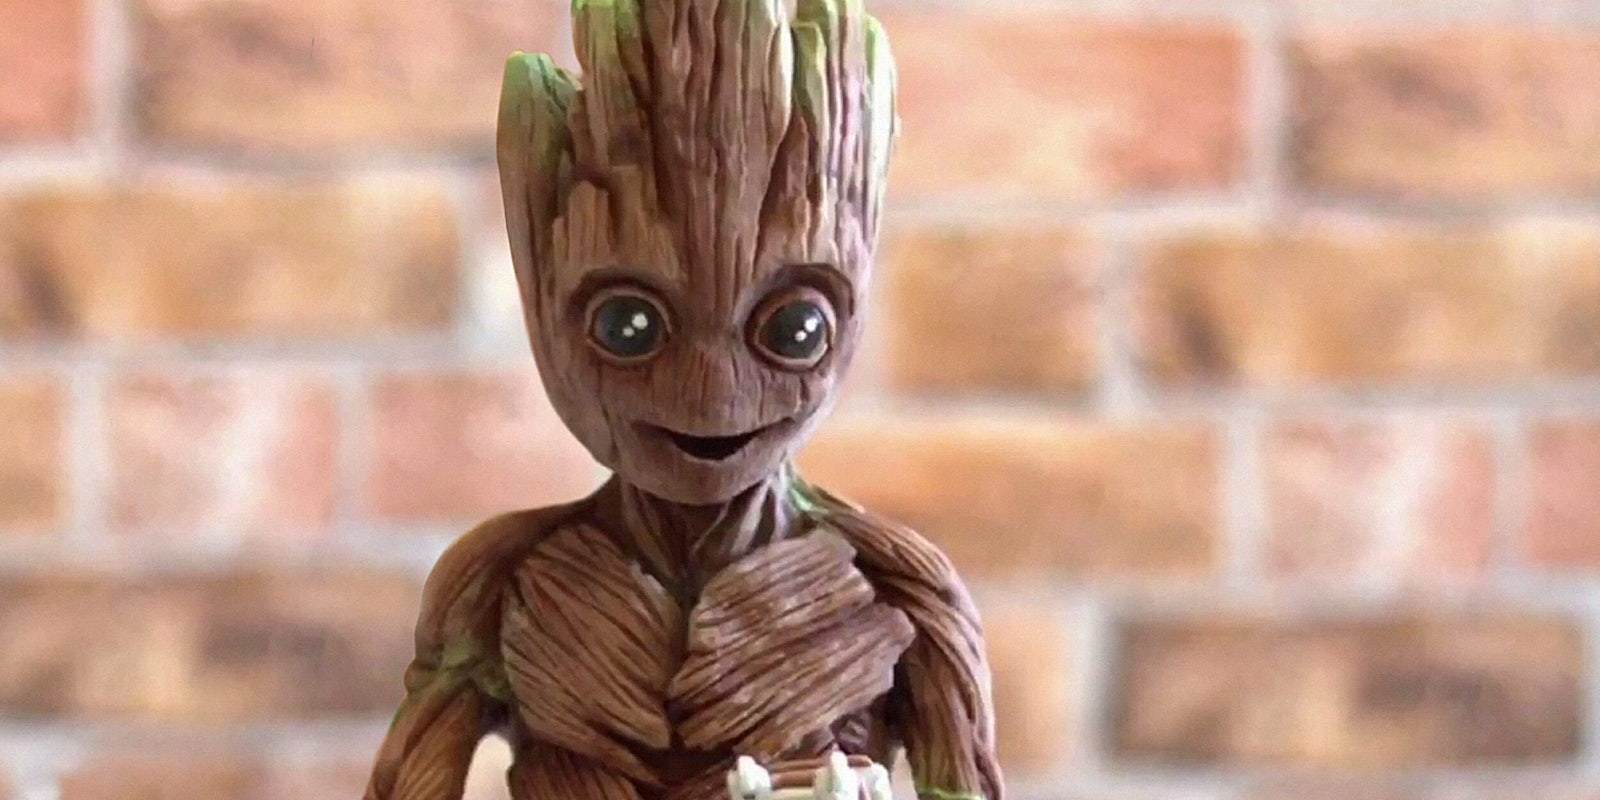 Guardians of the Galaxy Groot made of chocolate